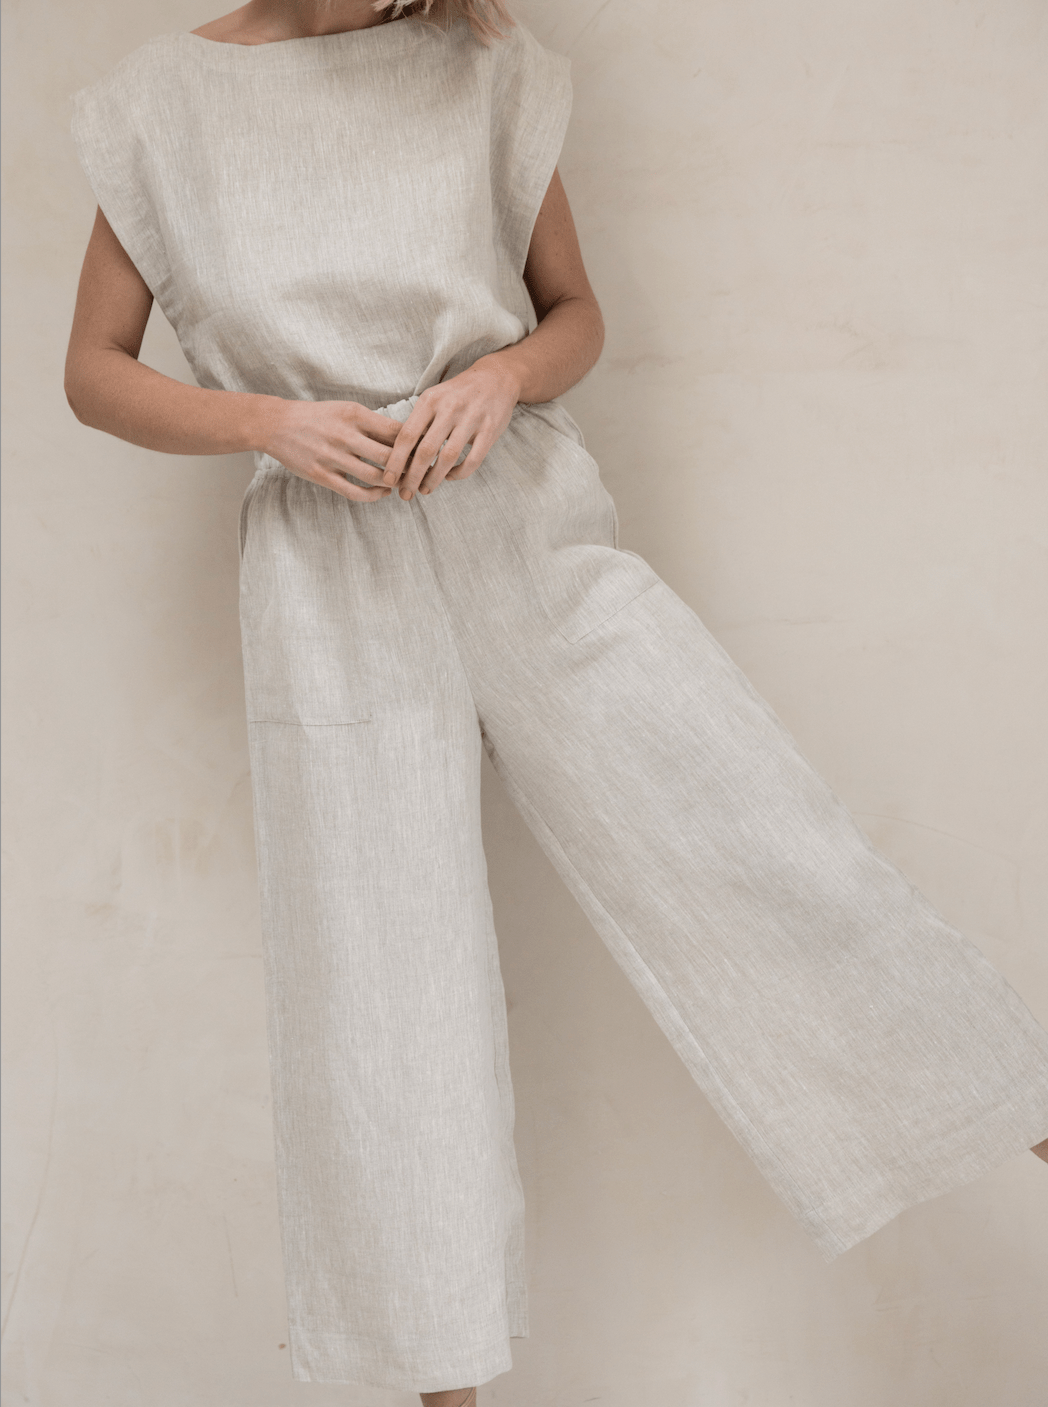 A woman wearing a white Everyday Pant - Natural Linen jumpsuit.